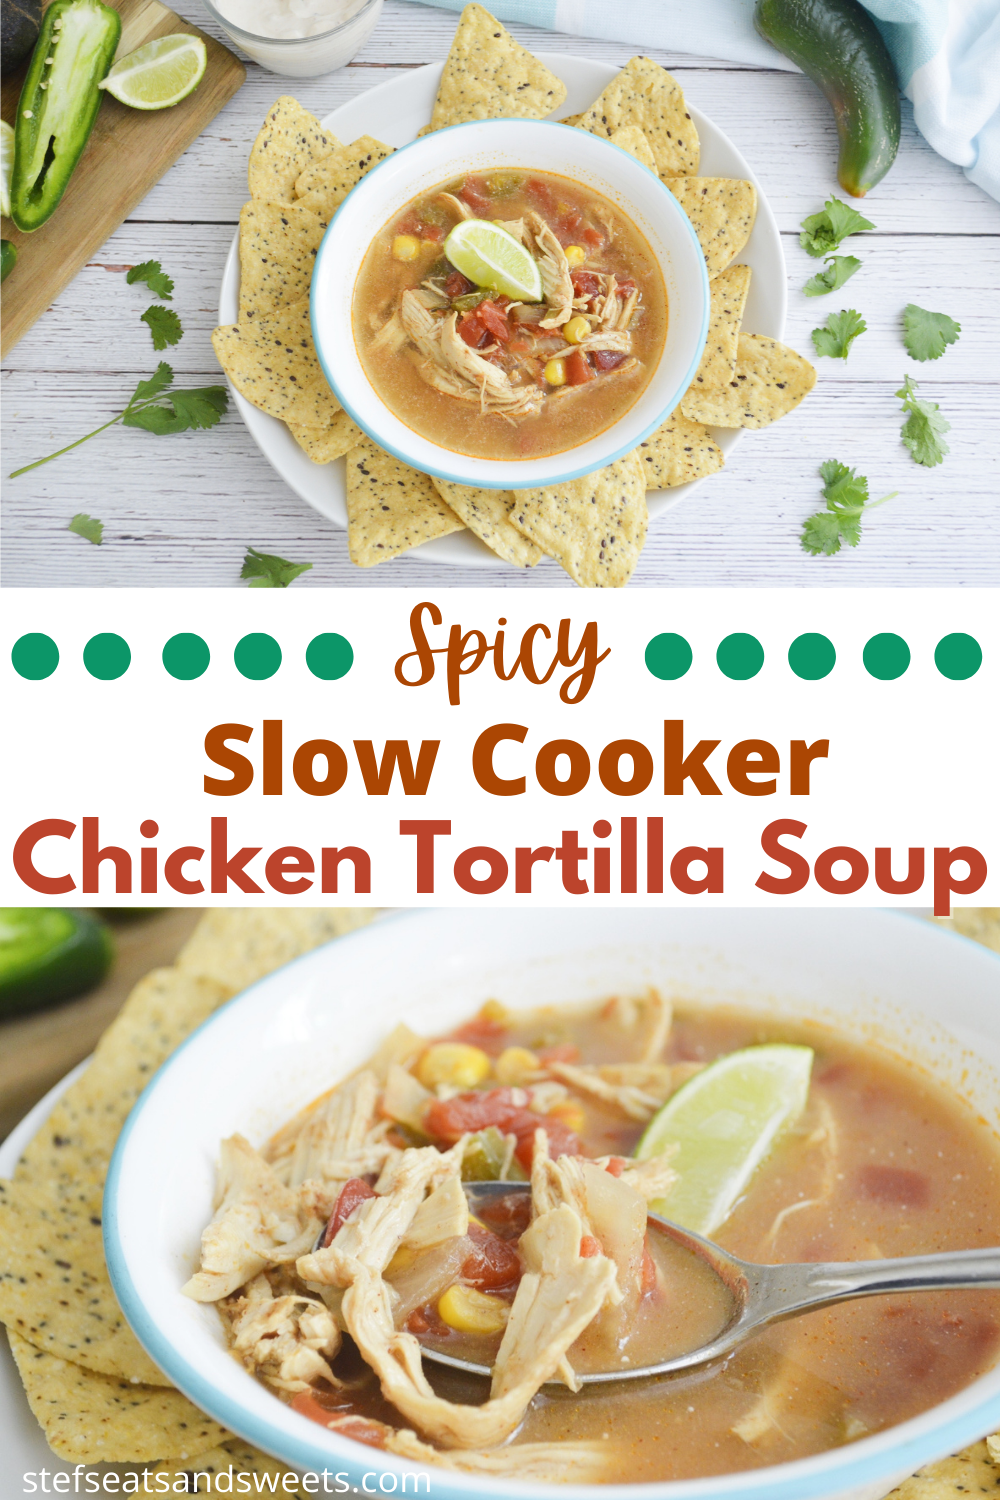 Spicy Slow Cooker Chicken Tortilla Soup Pinterest Collage 